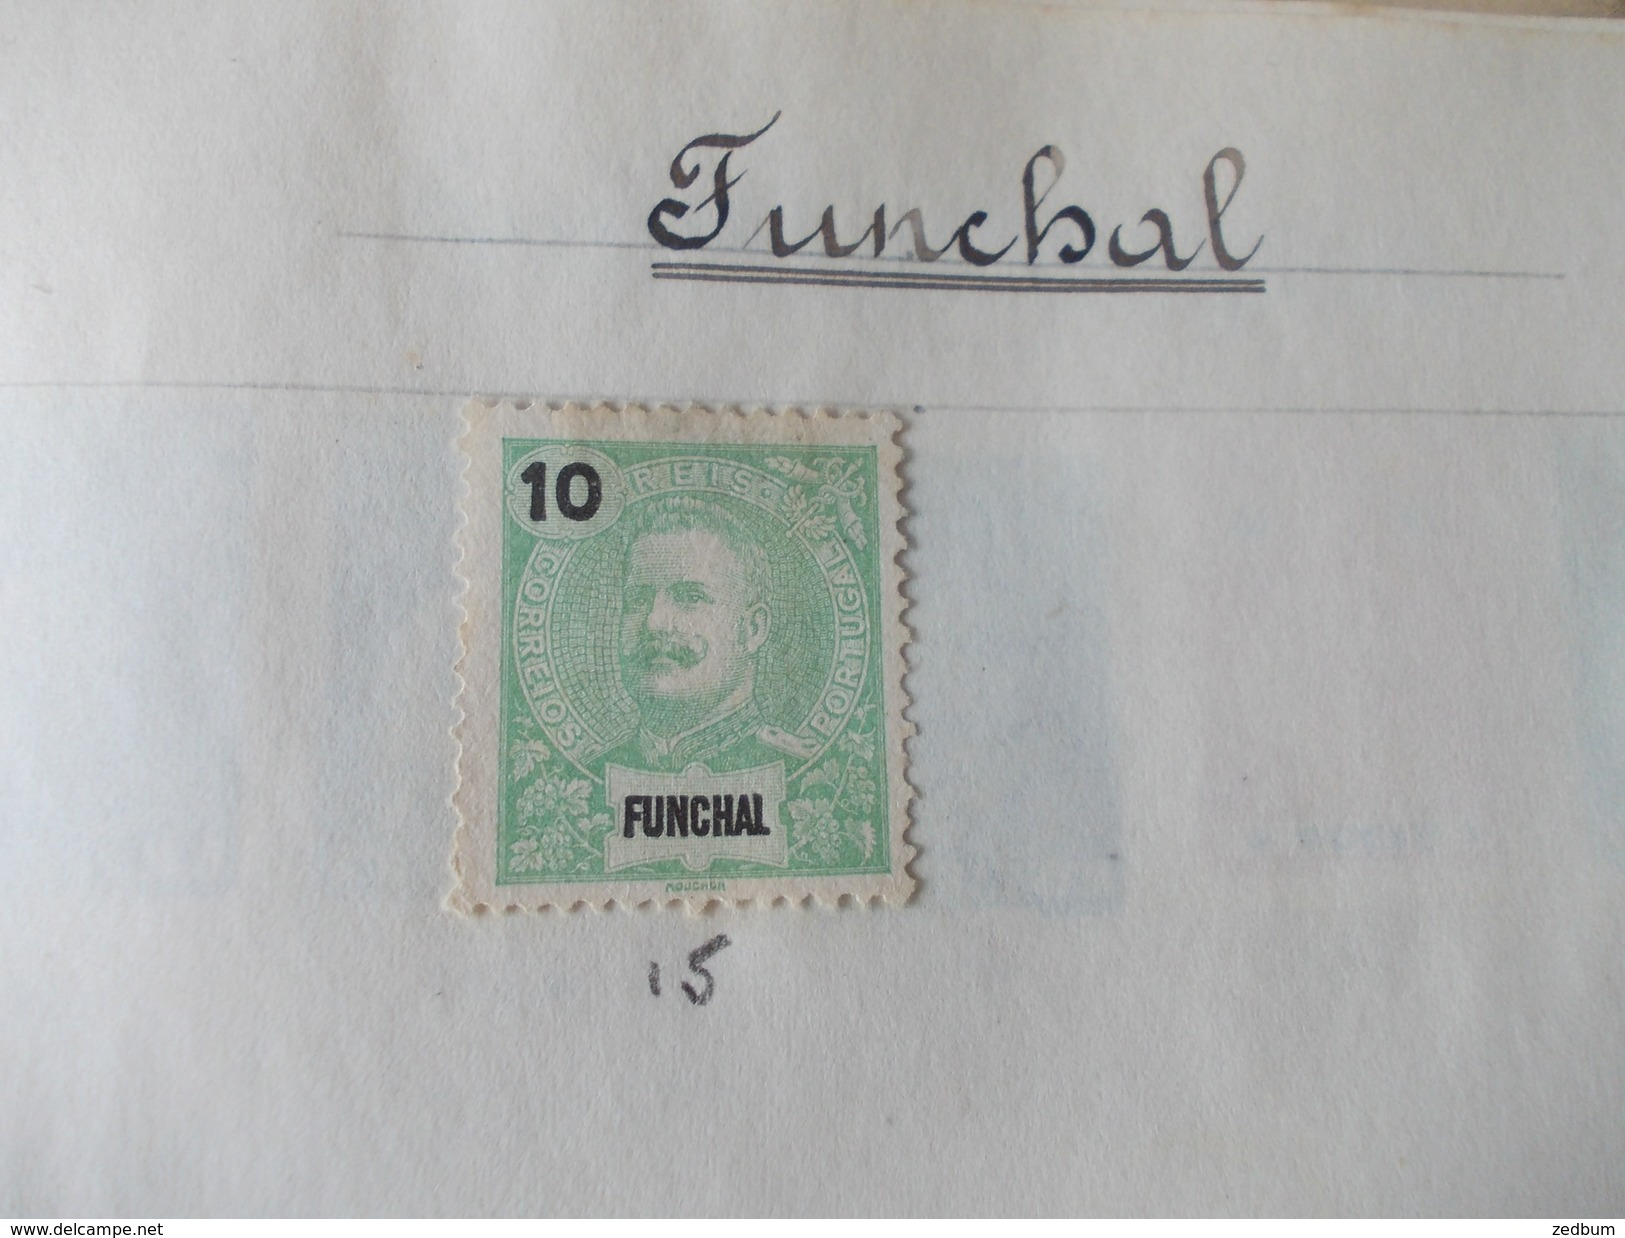 TIMBRE 5 Pages Funchal Guinée Portugaise Inde Hyderabad Hong Kong 12 Timbres Valeur 3.55 &euro; - Portugiesisch-Guinea